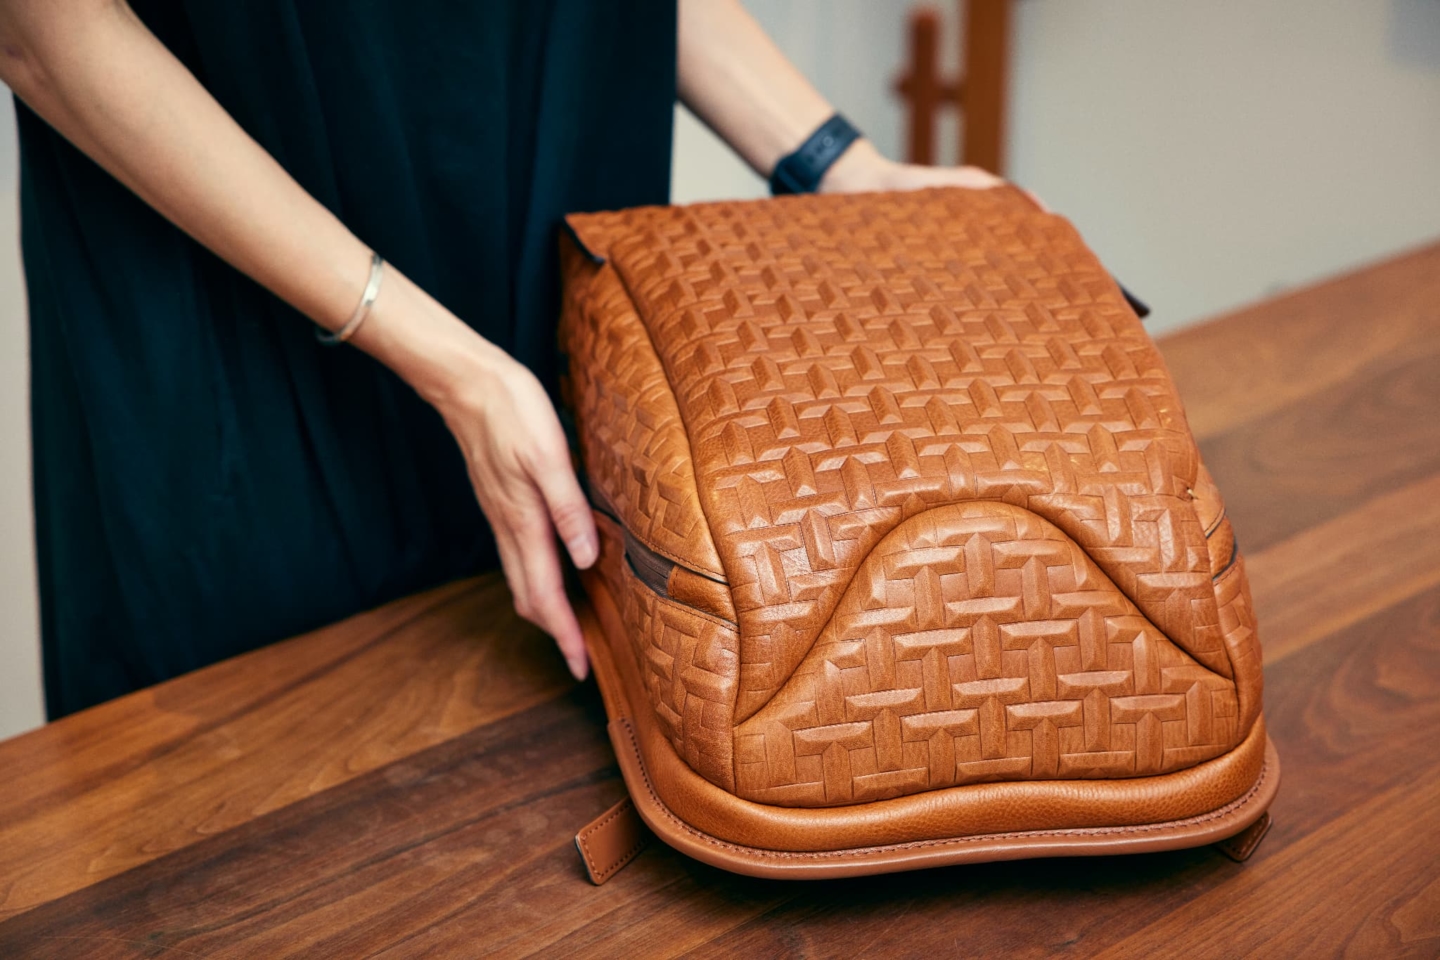 New Backpack that Further Embodies the Charm of Leather: A New Challenge for Tsuchiya Kaban